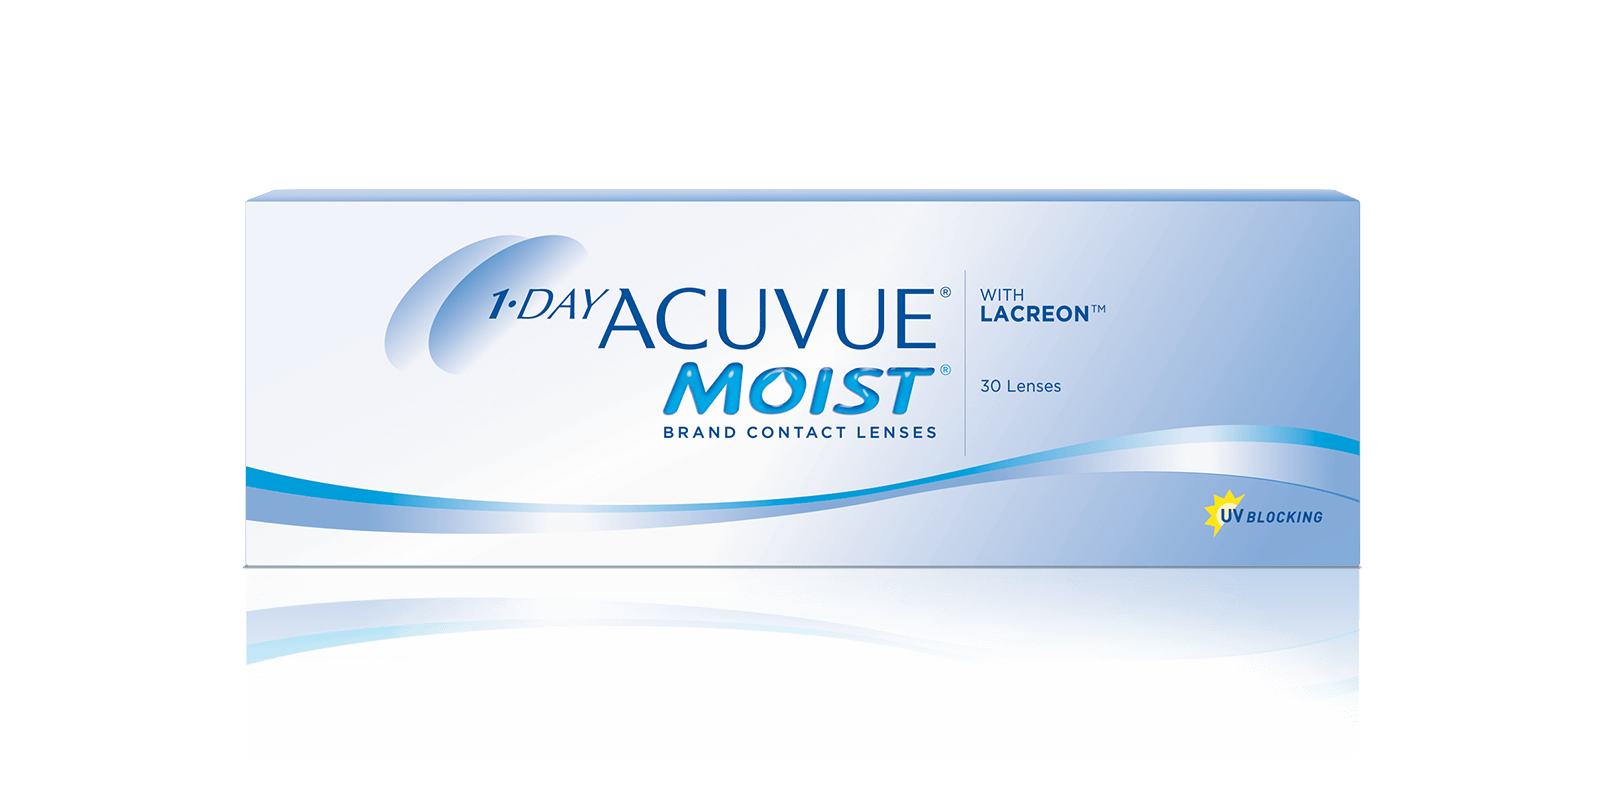 1-Day Acuvue® Moist con LACREON™